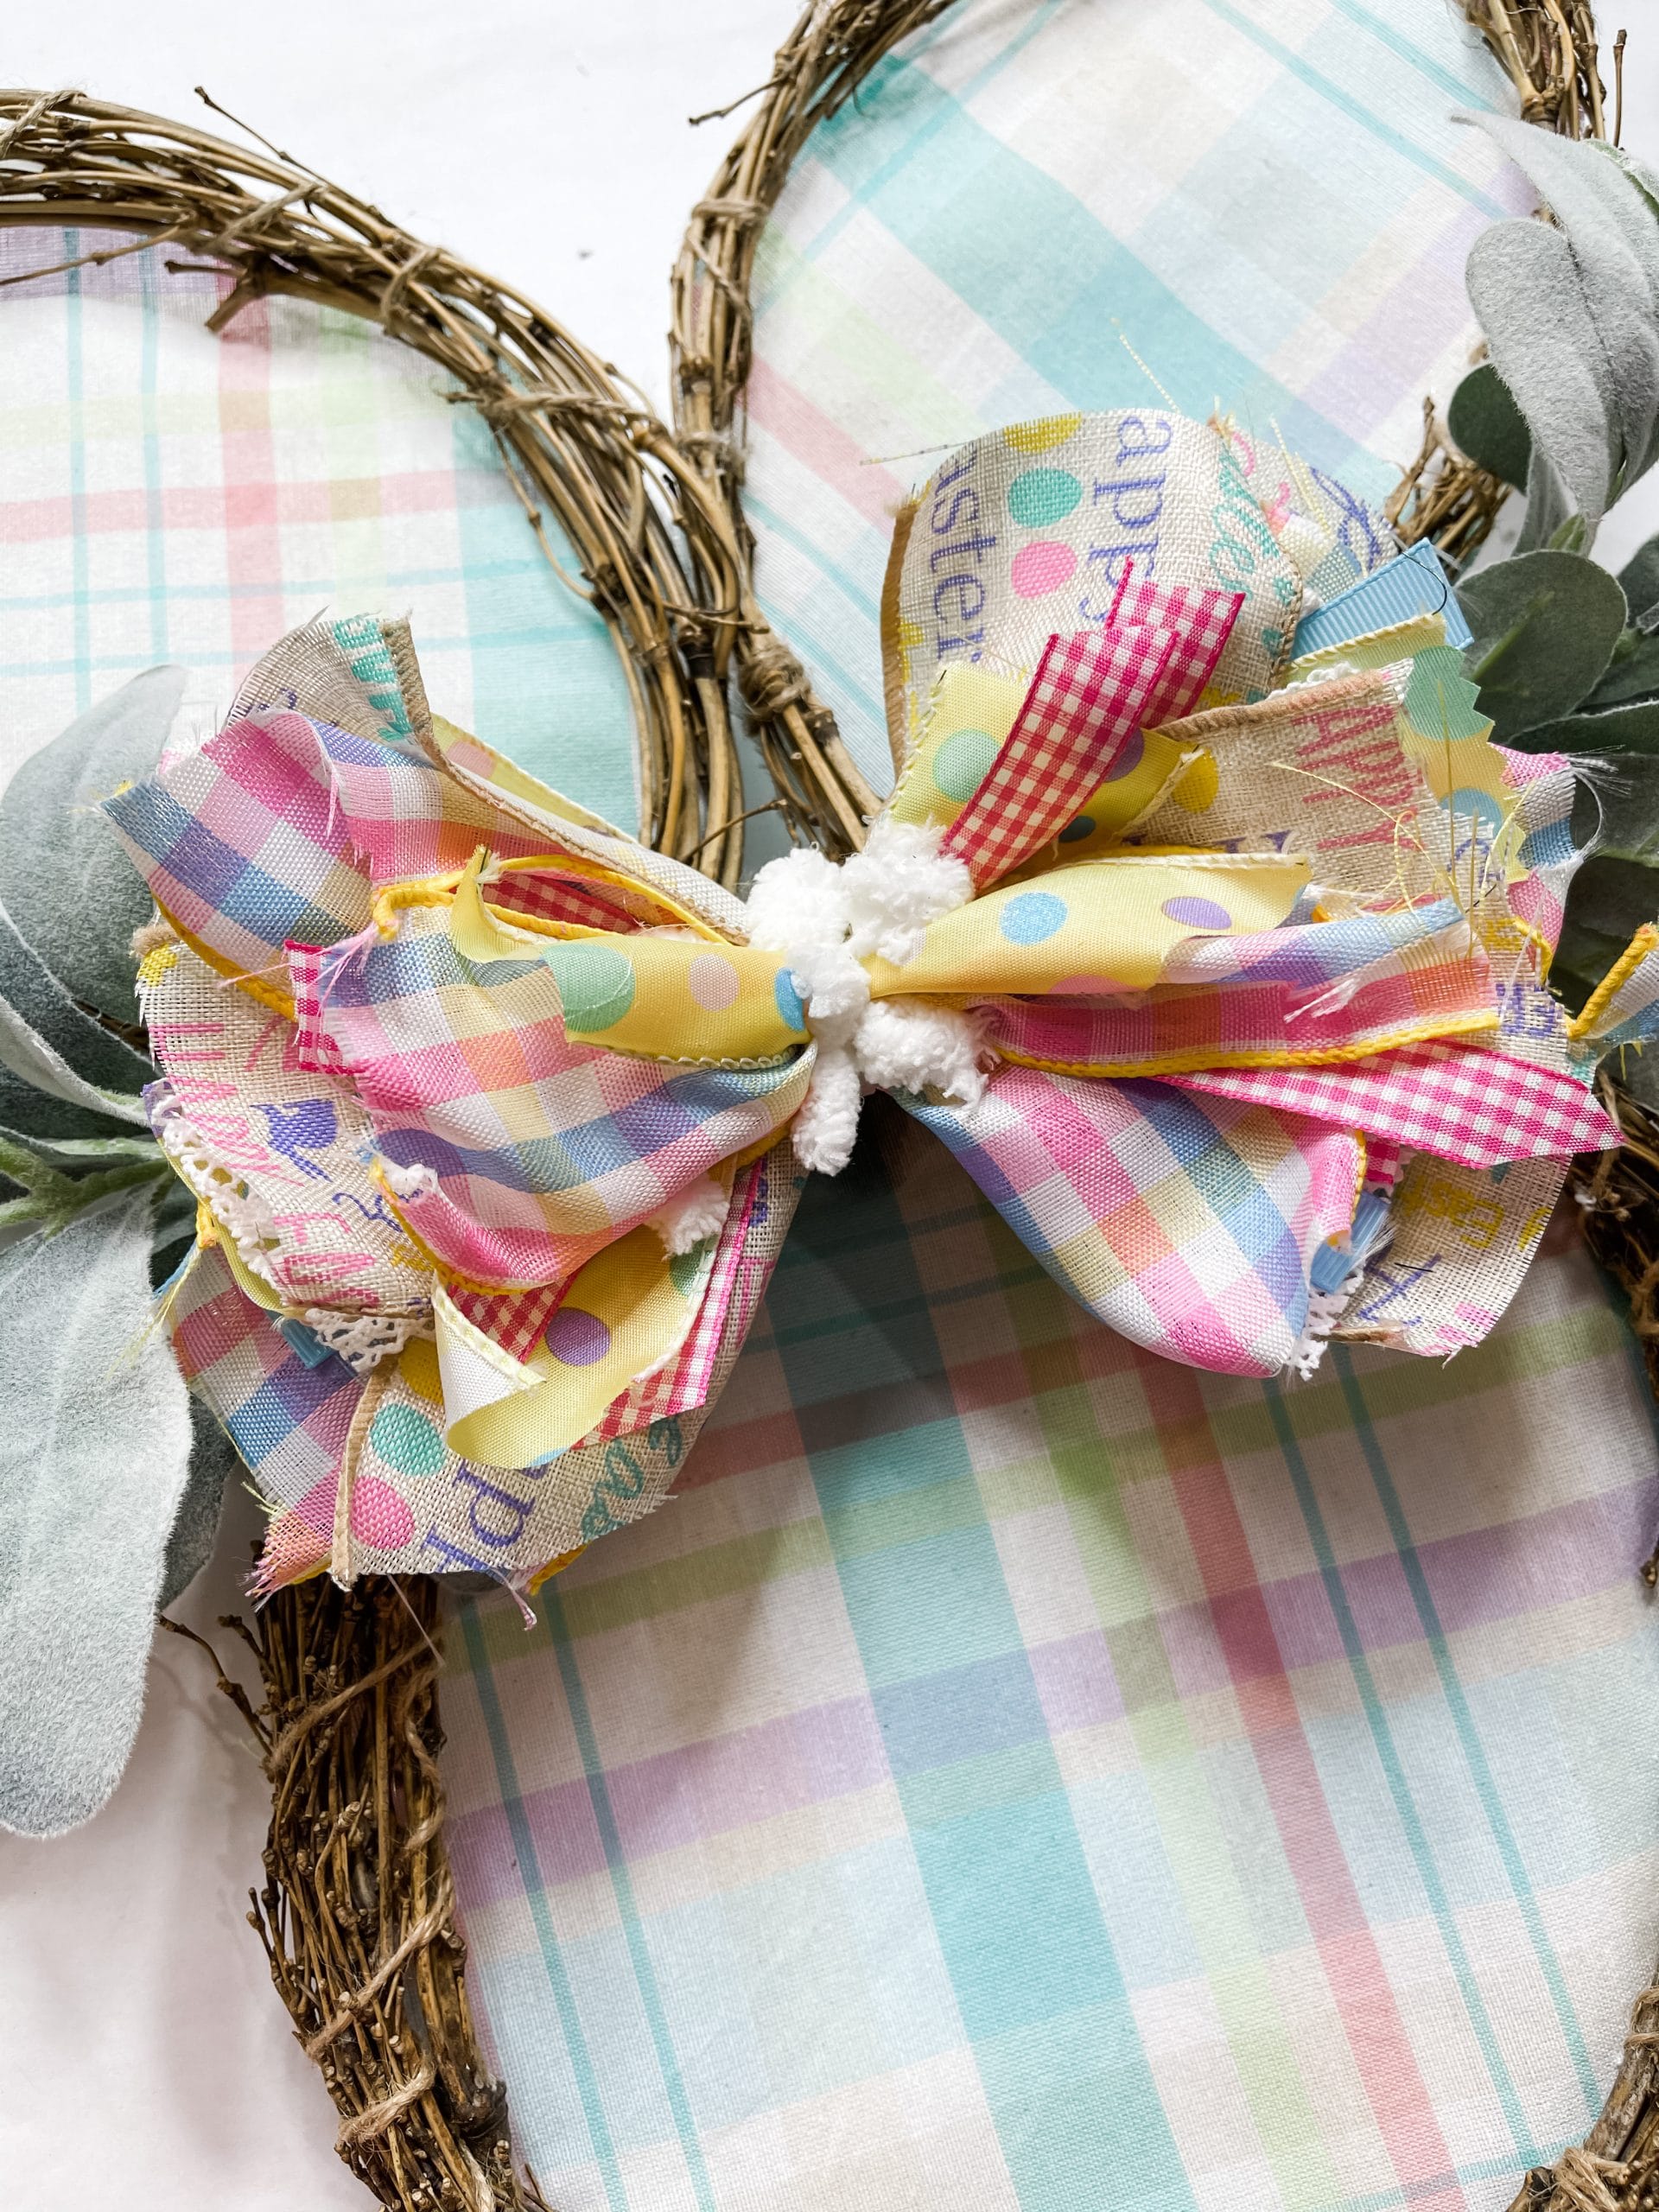 DIY Pastel Plaid and Grapevine Bunny